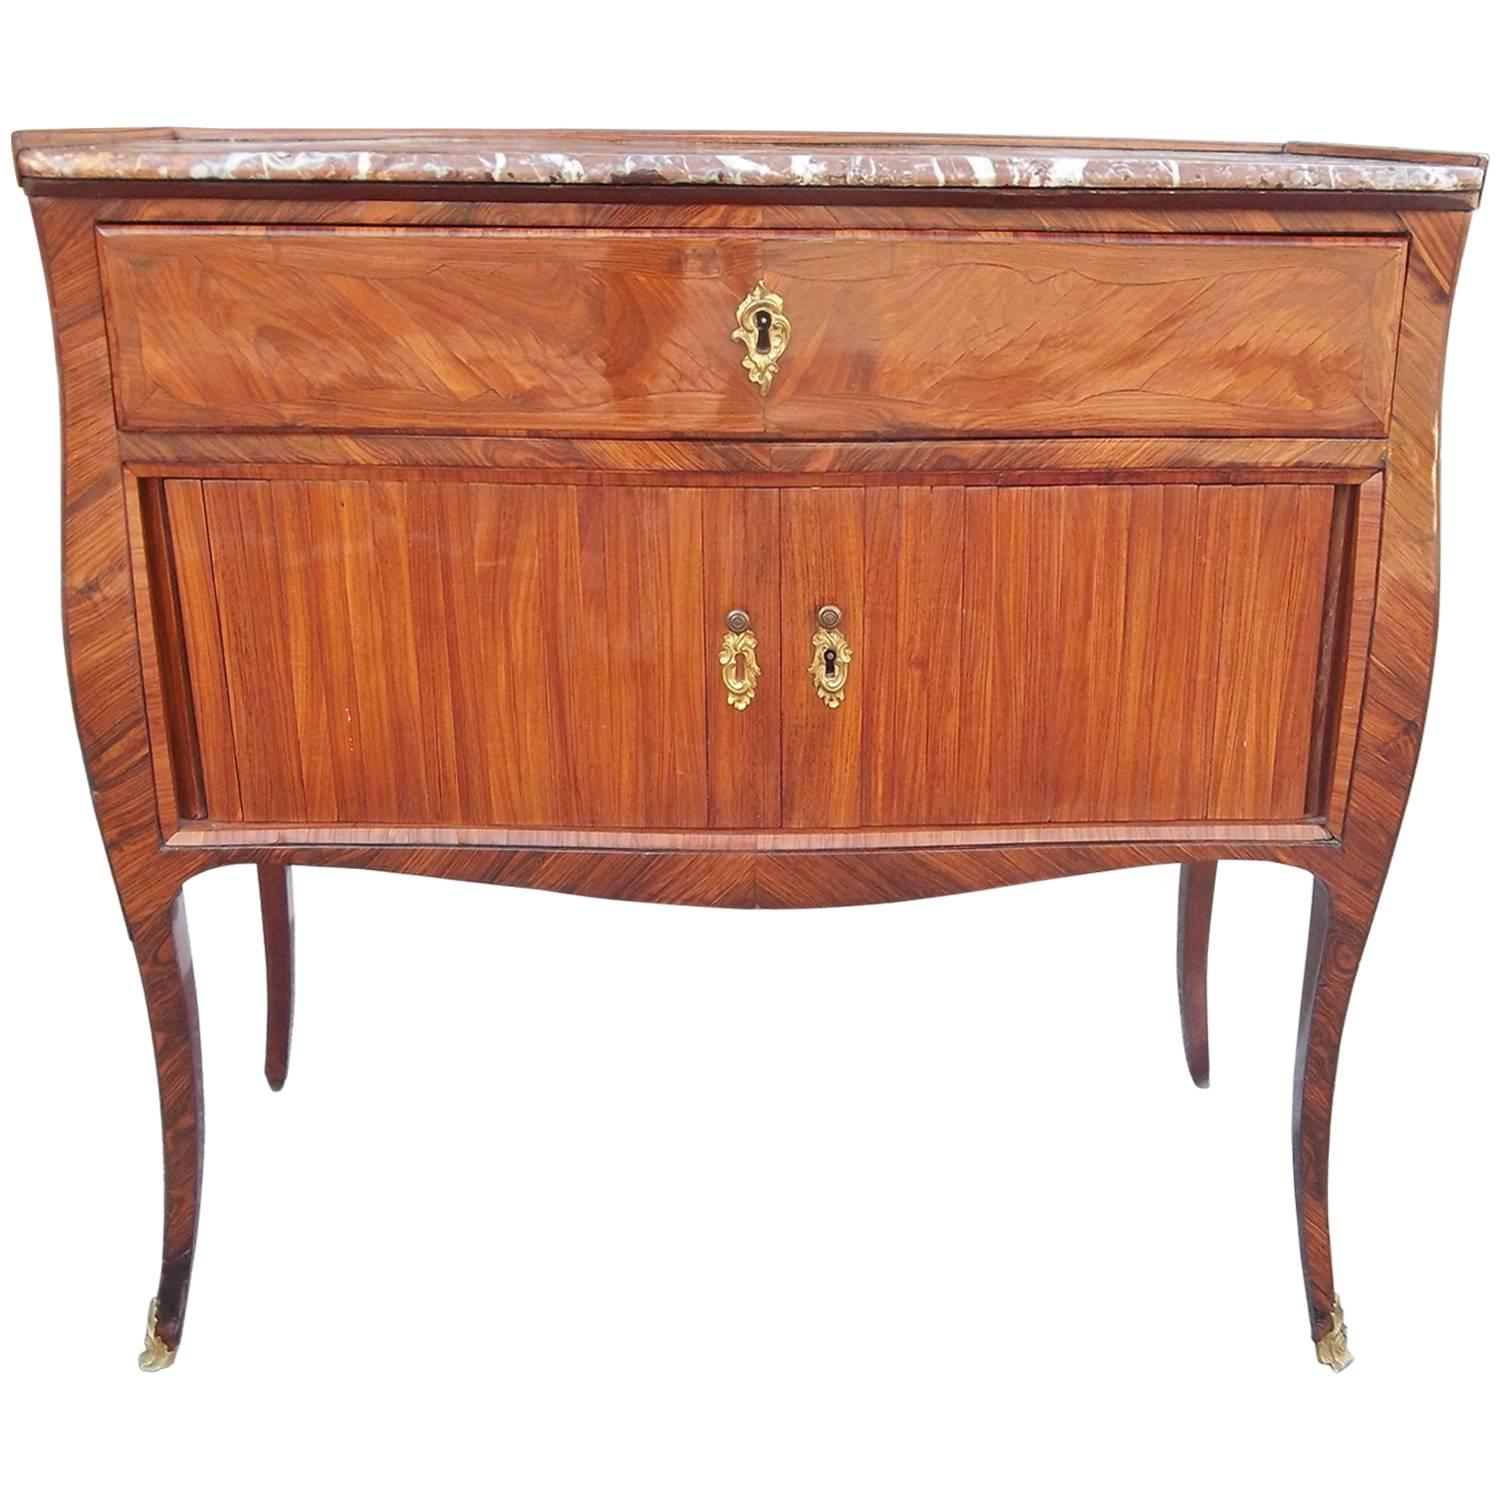 With tambour doors (in fine working condition). The cabinet with inset marble-top. The top drawer with hand hewn dove tailing in 18th century manner. Each end with well defined tulips (pattern in the veneer). Excellent color and patina. 
Very well